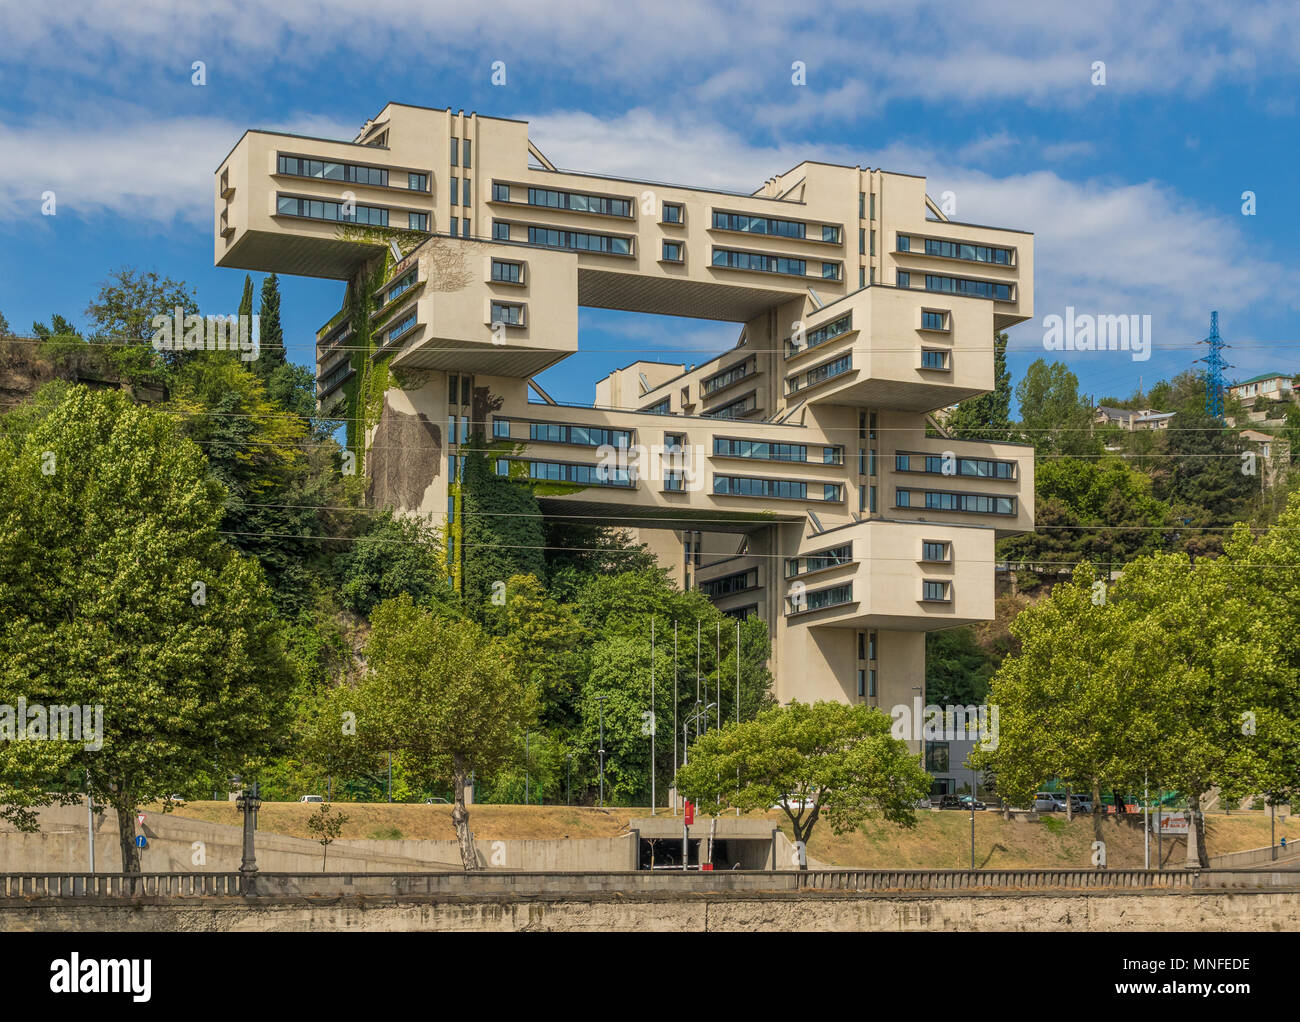 In Tbilisi is possible to find many examples of soviet modern architecture. Here in particular the new National Bank of Georgia Stock Photo